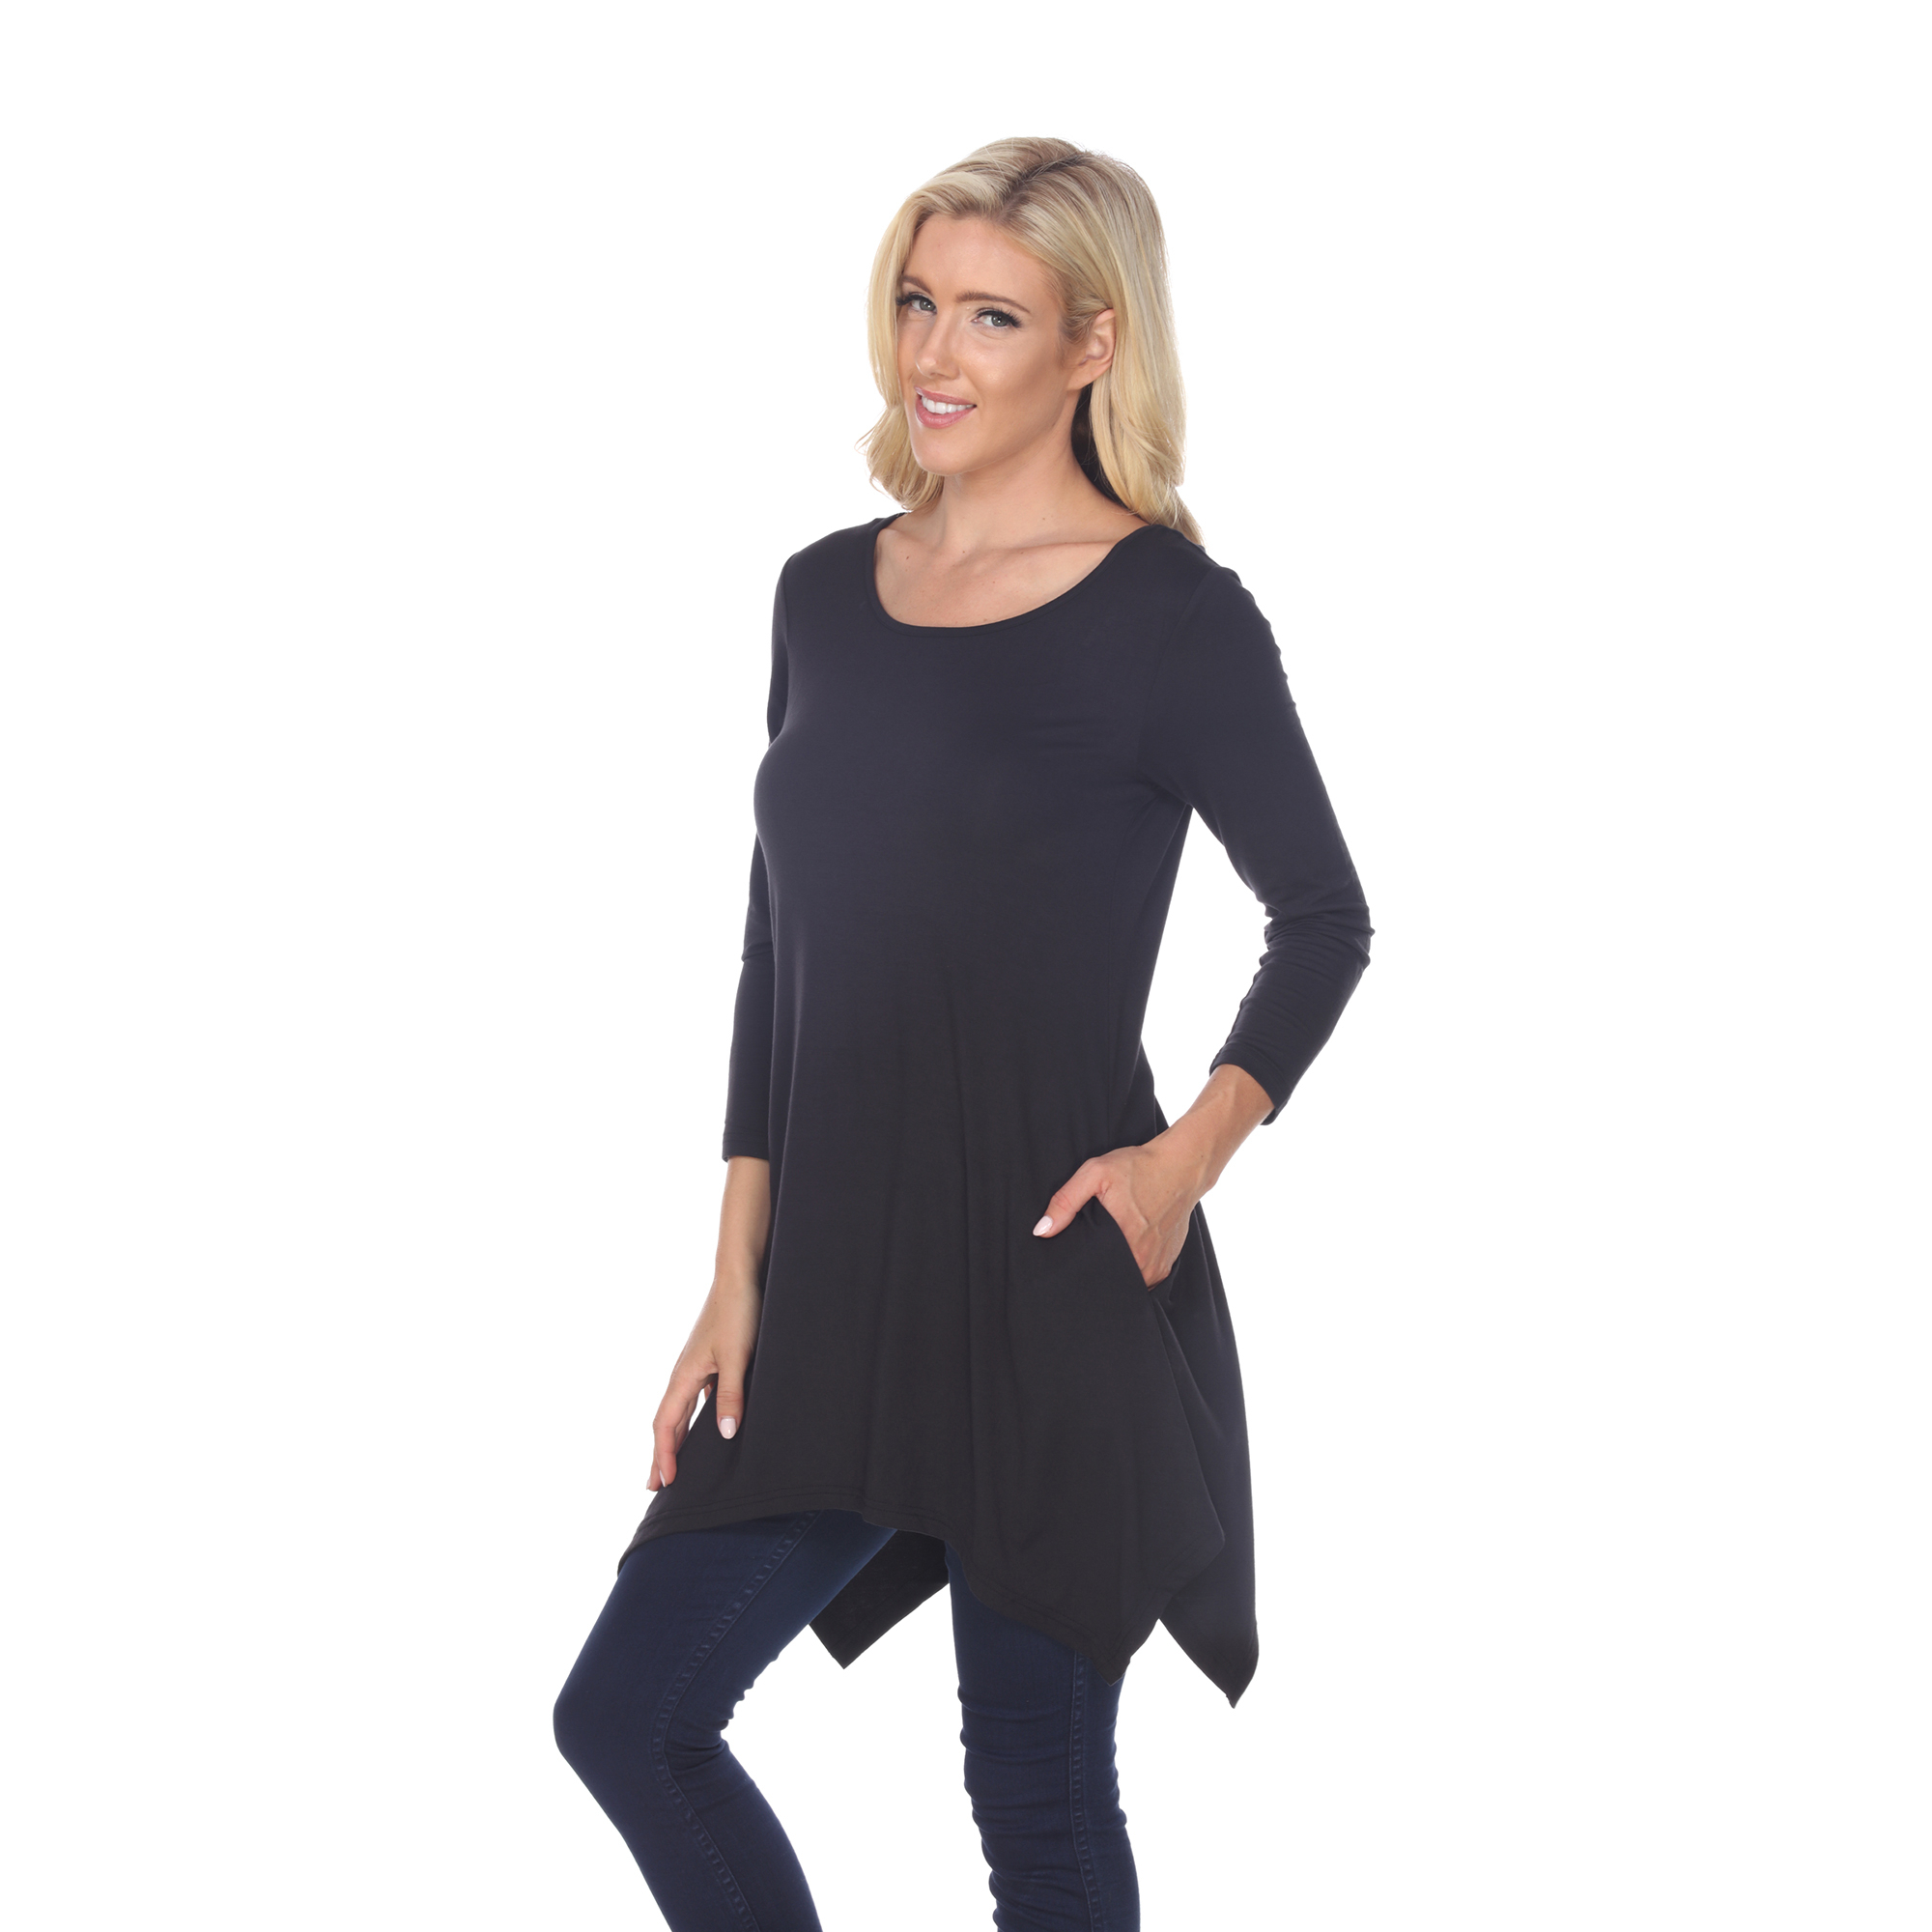 White Mark Women's Quarter Sleeve Tunic Top With Pockets - Charcoal, 3X